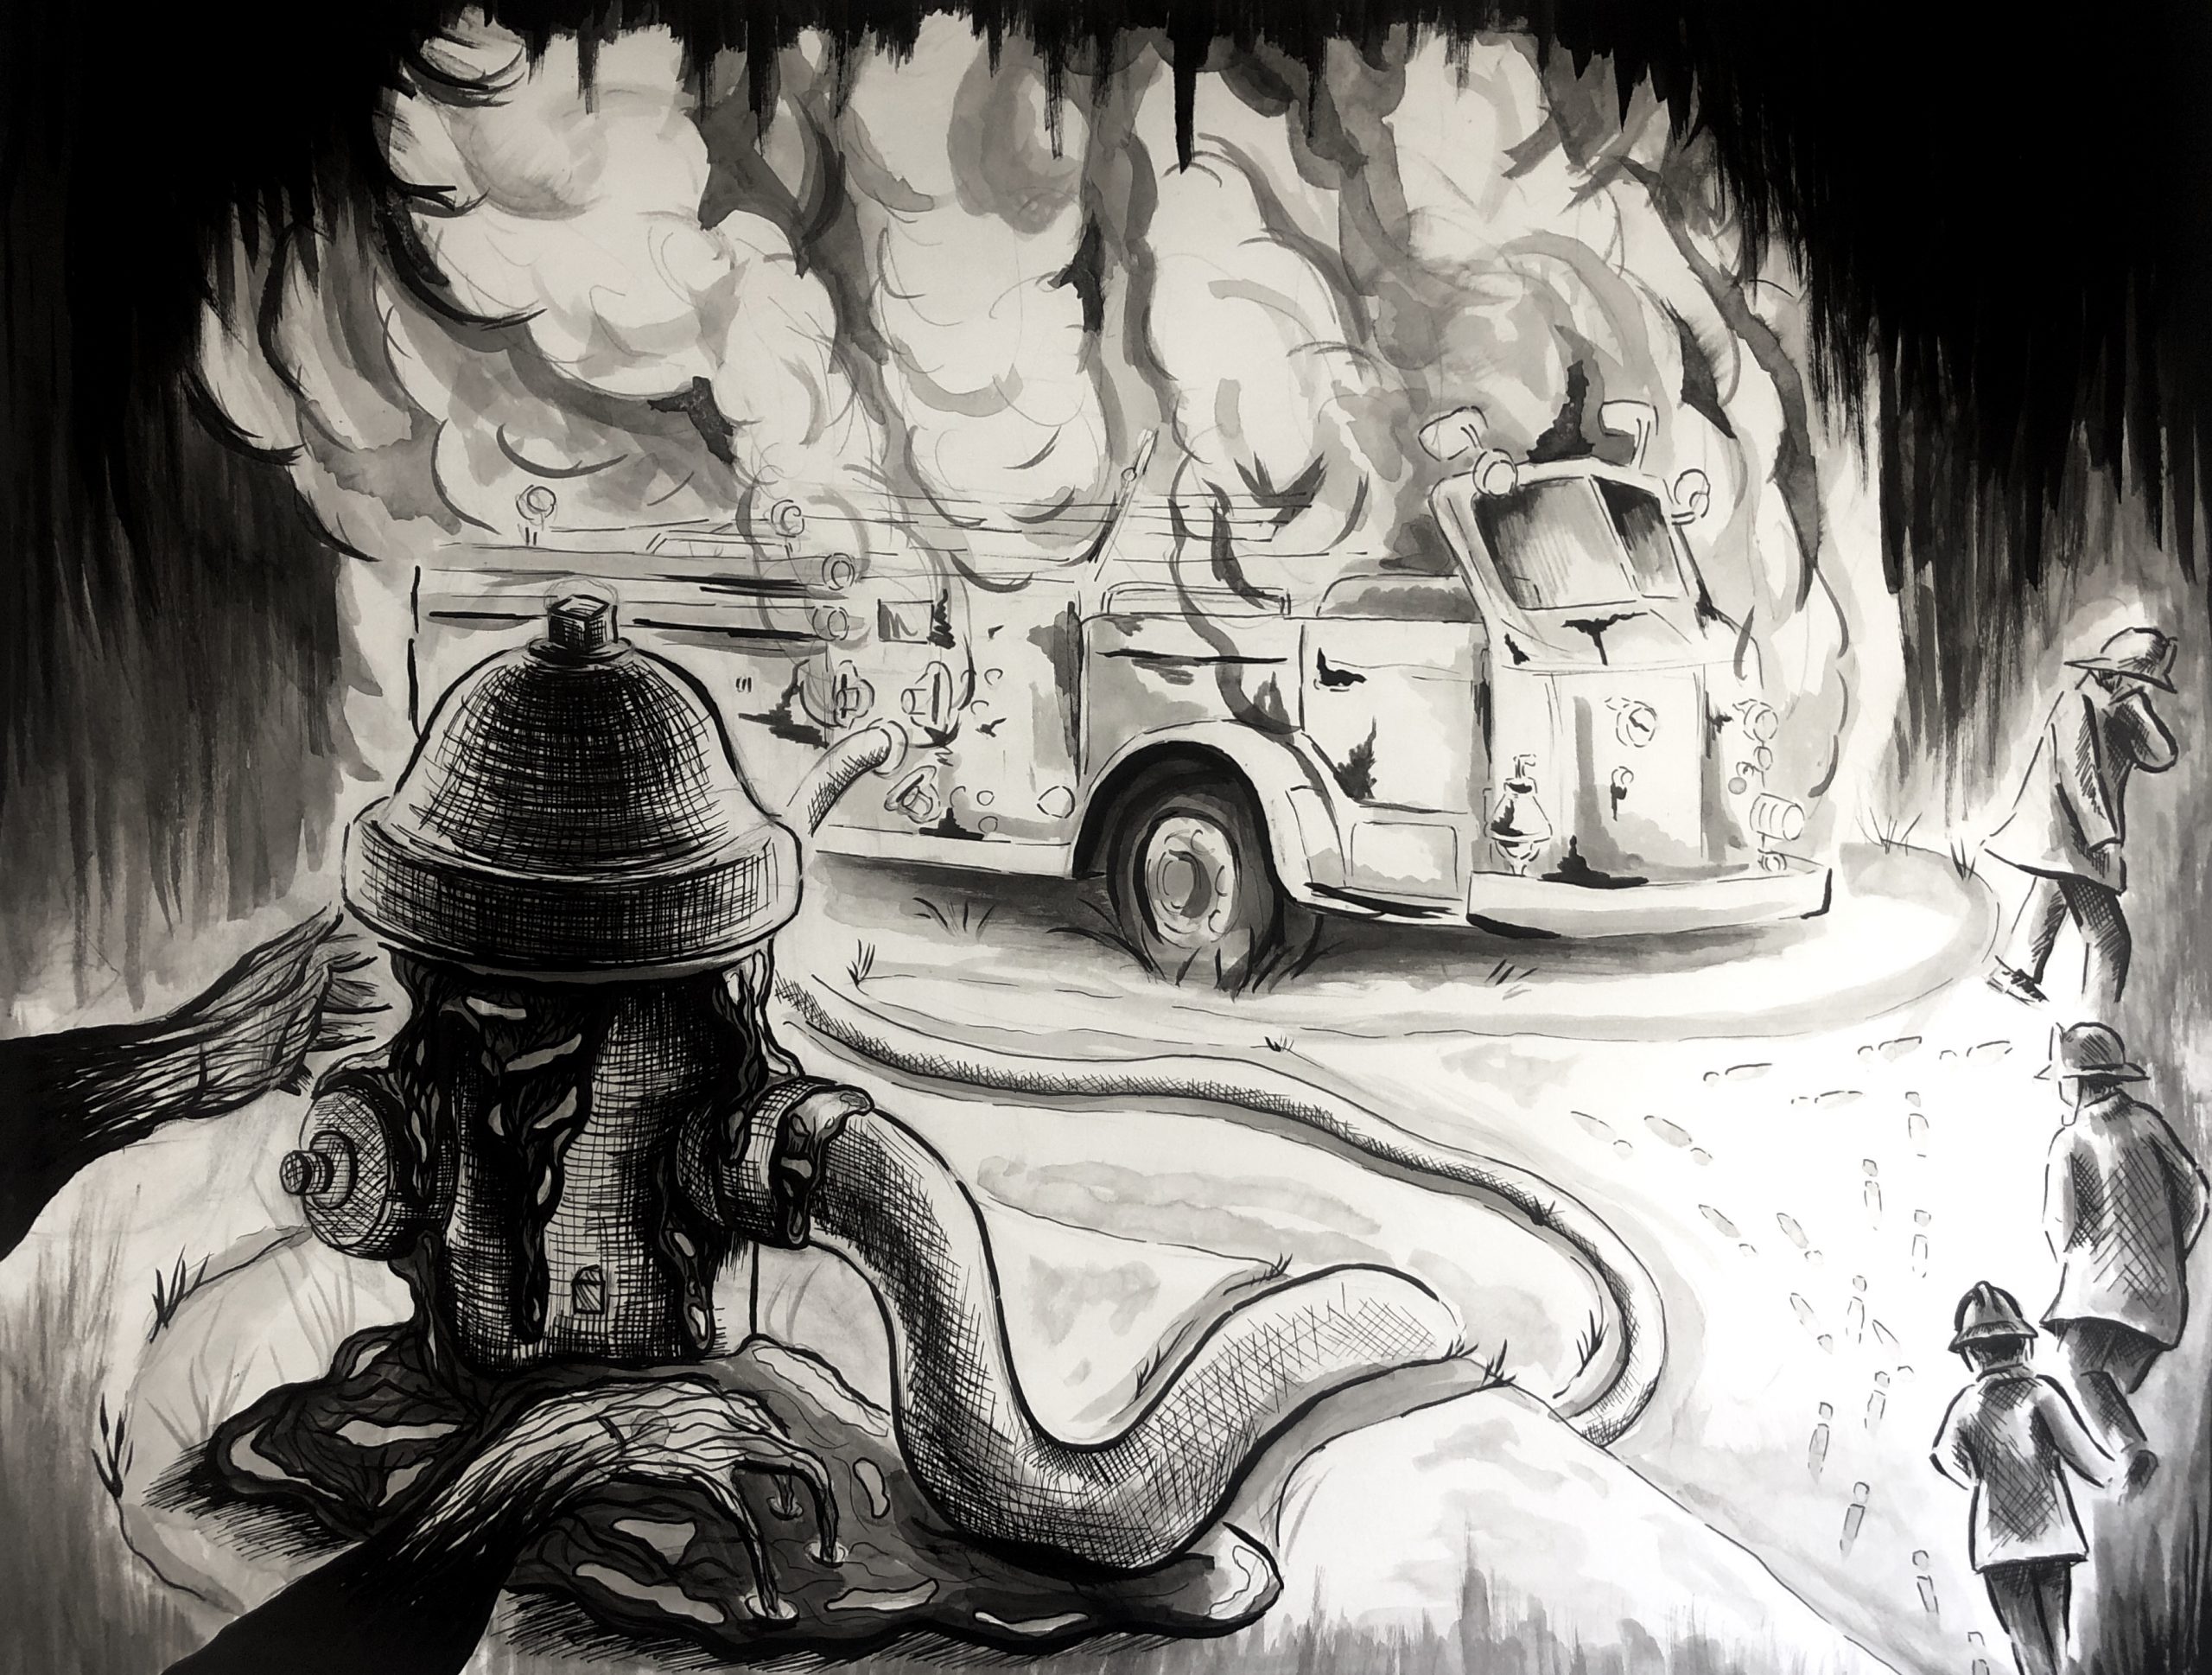 ink drawing by Hannah Kim of a fire truck burning